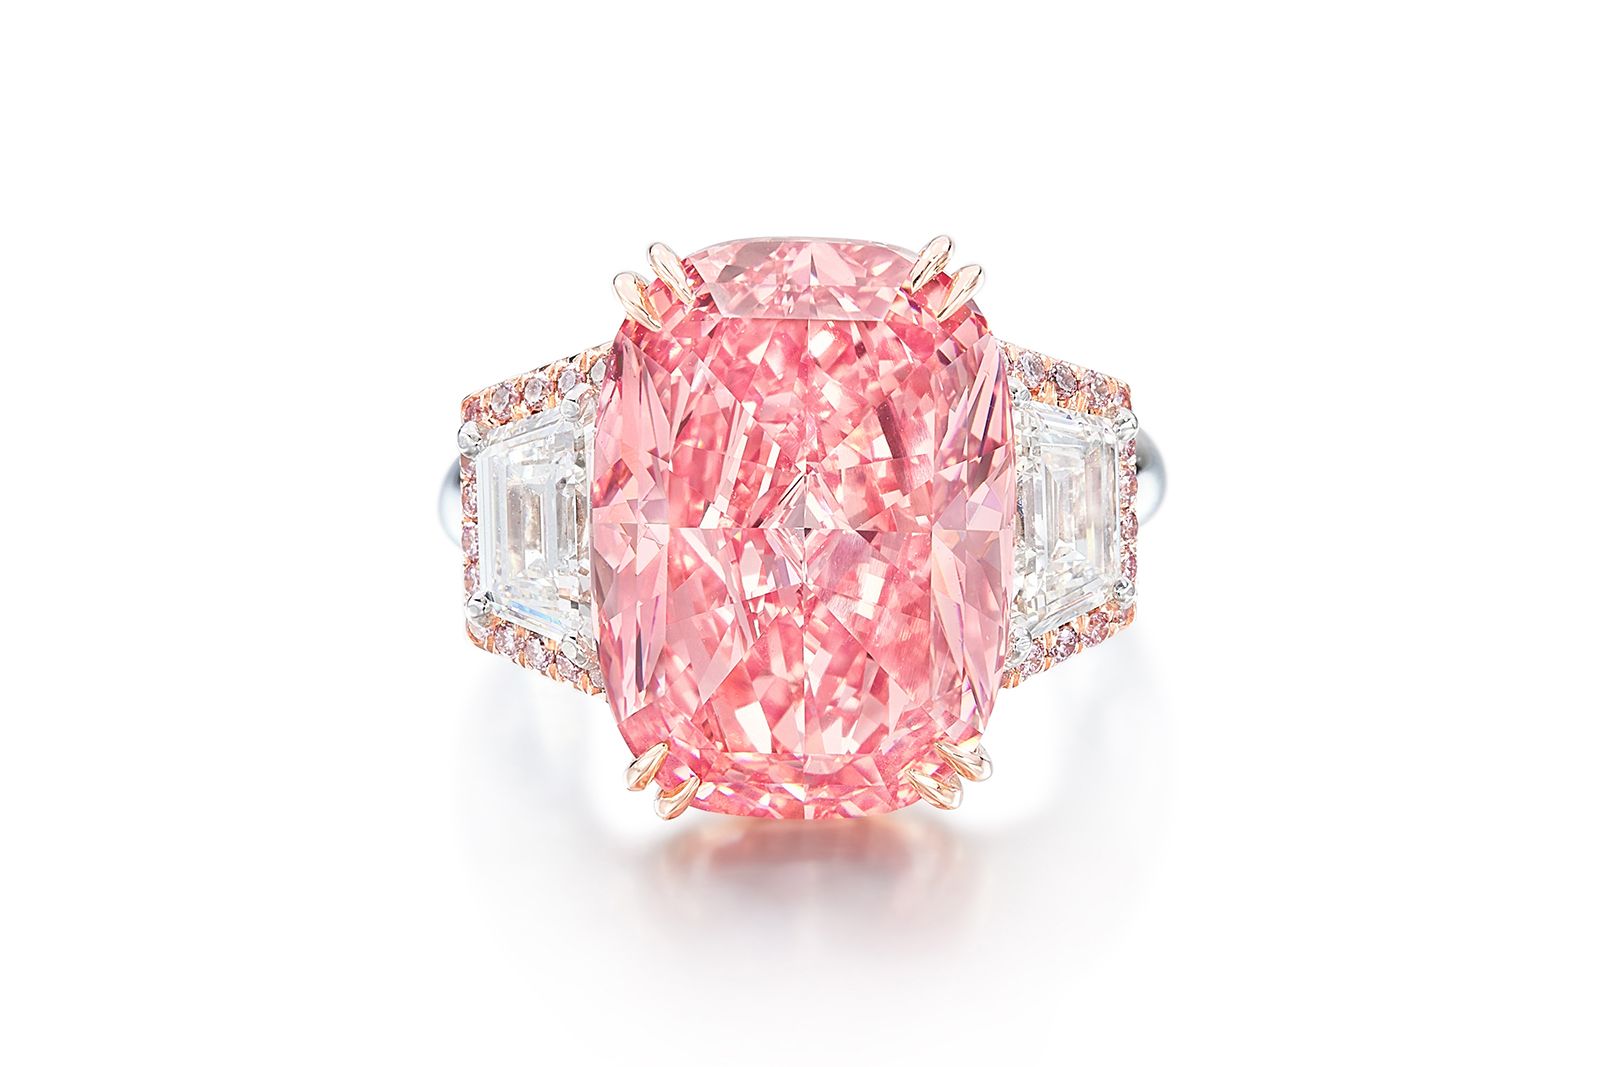 The Williamson Pink Star diamond set into a trilogy ring